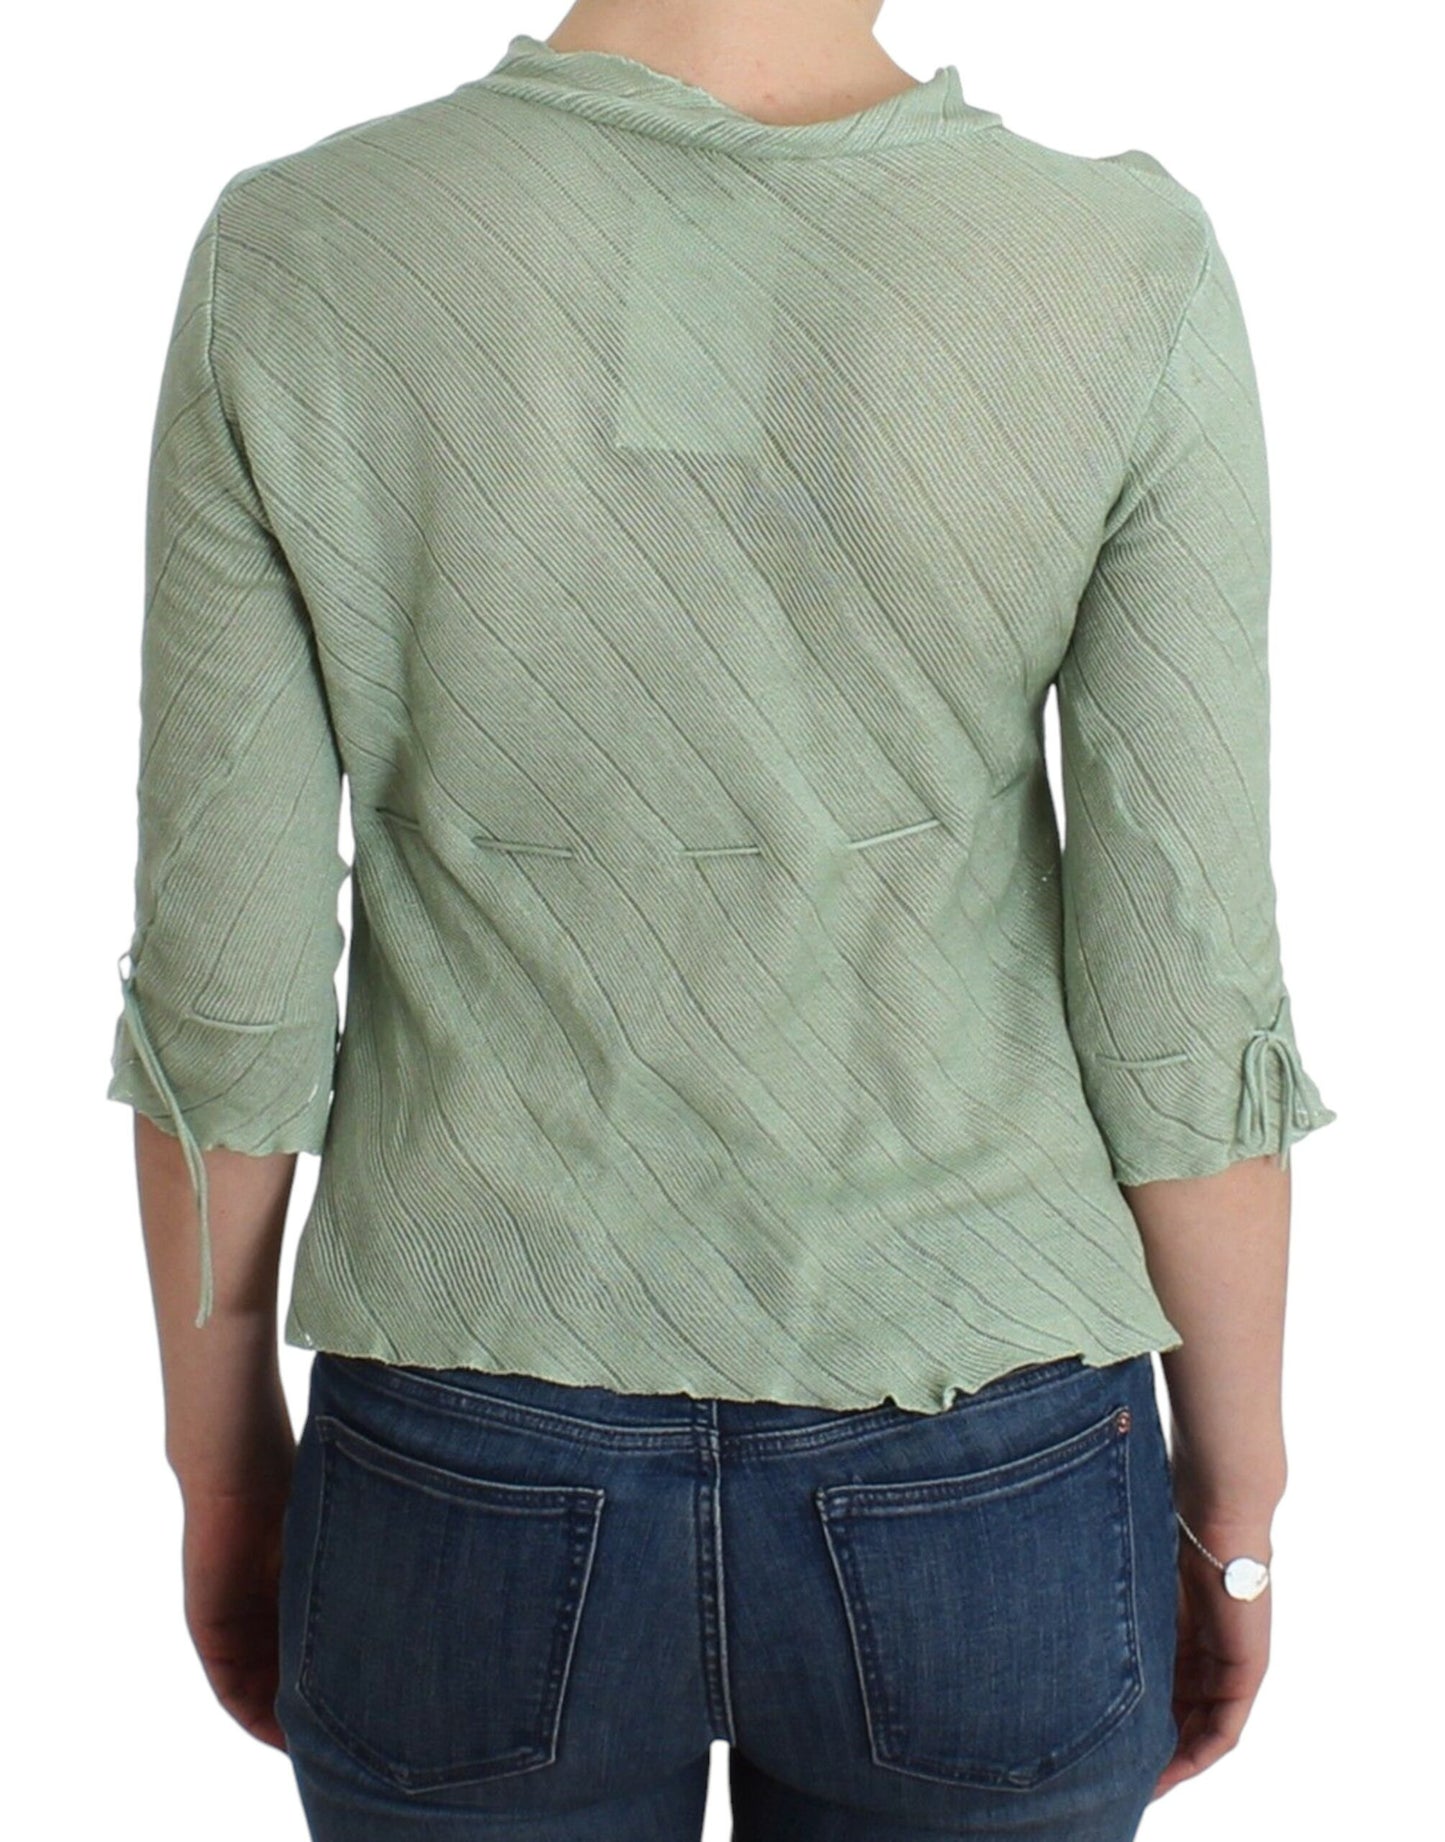 Ermanno Scervino Chic Green Knitted Top – Ethereal Elegance